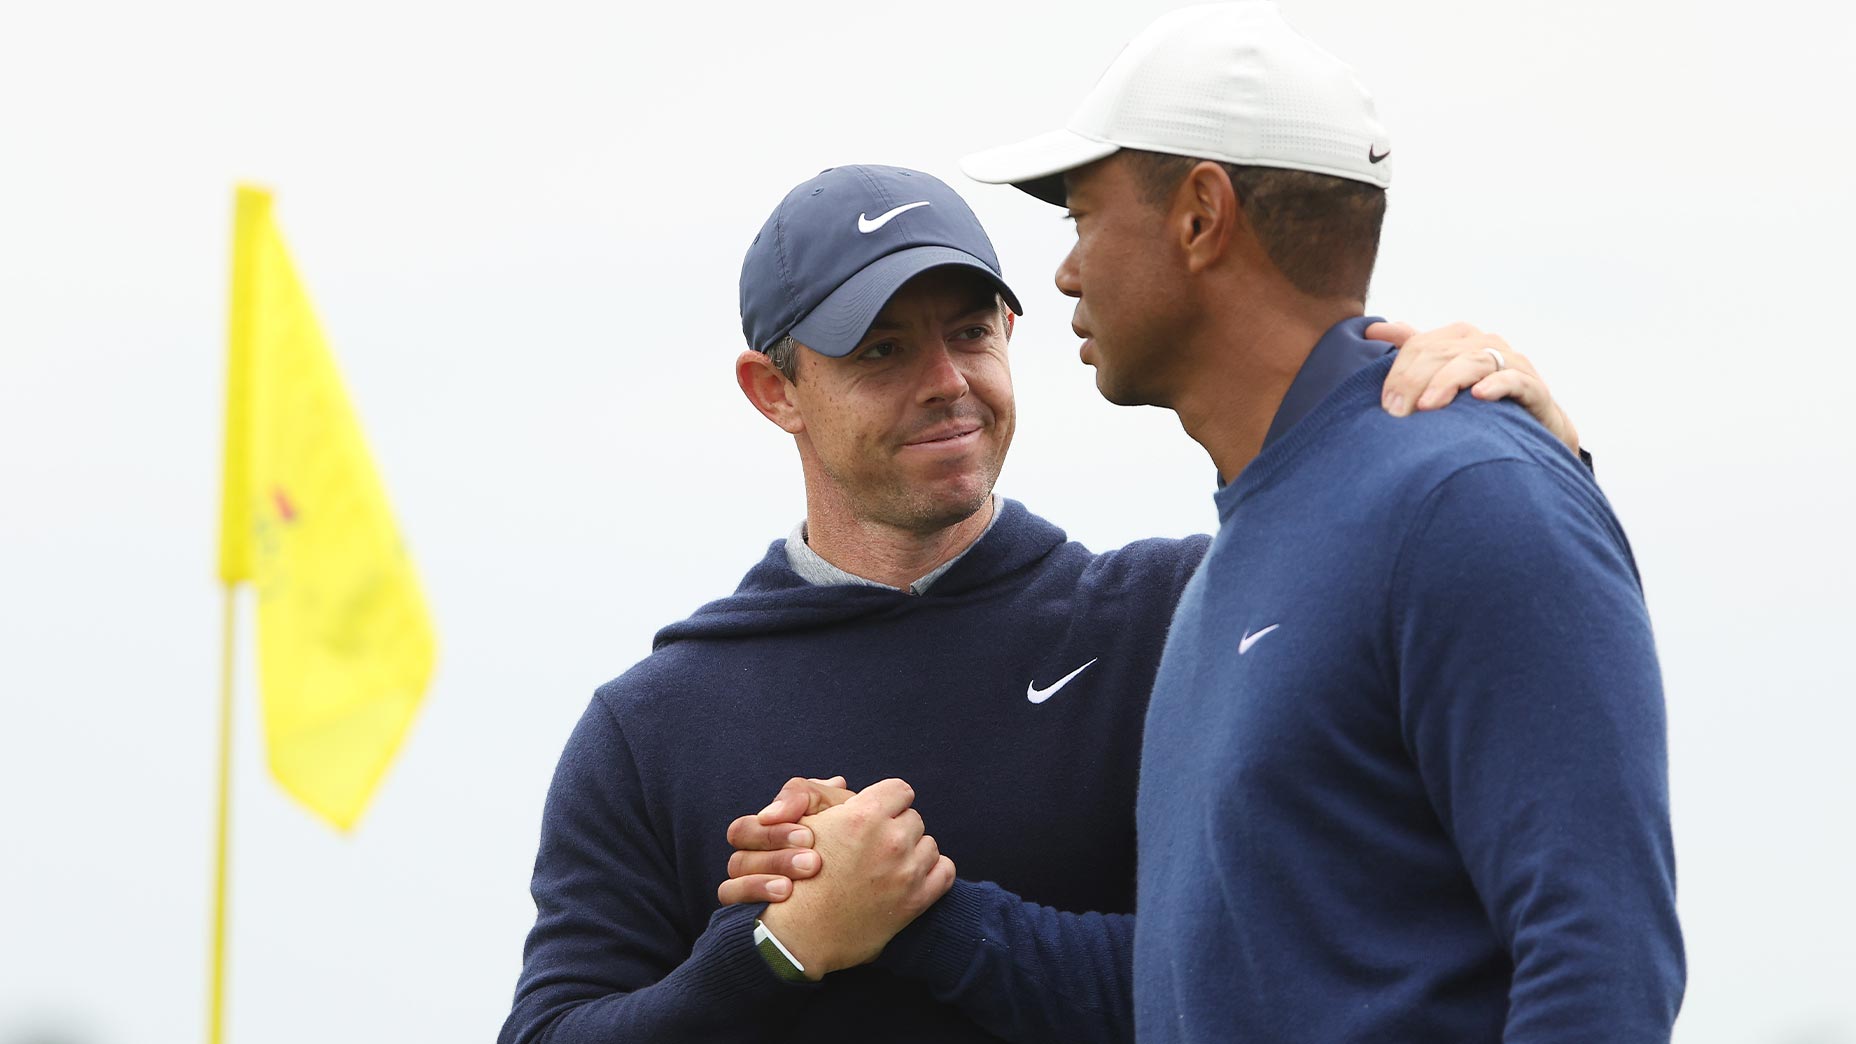 rory mcilroy and tiger woods shake hands at golf tournament